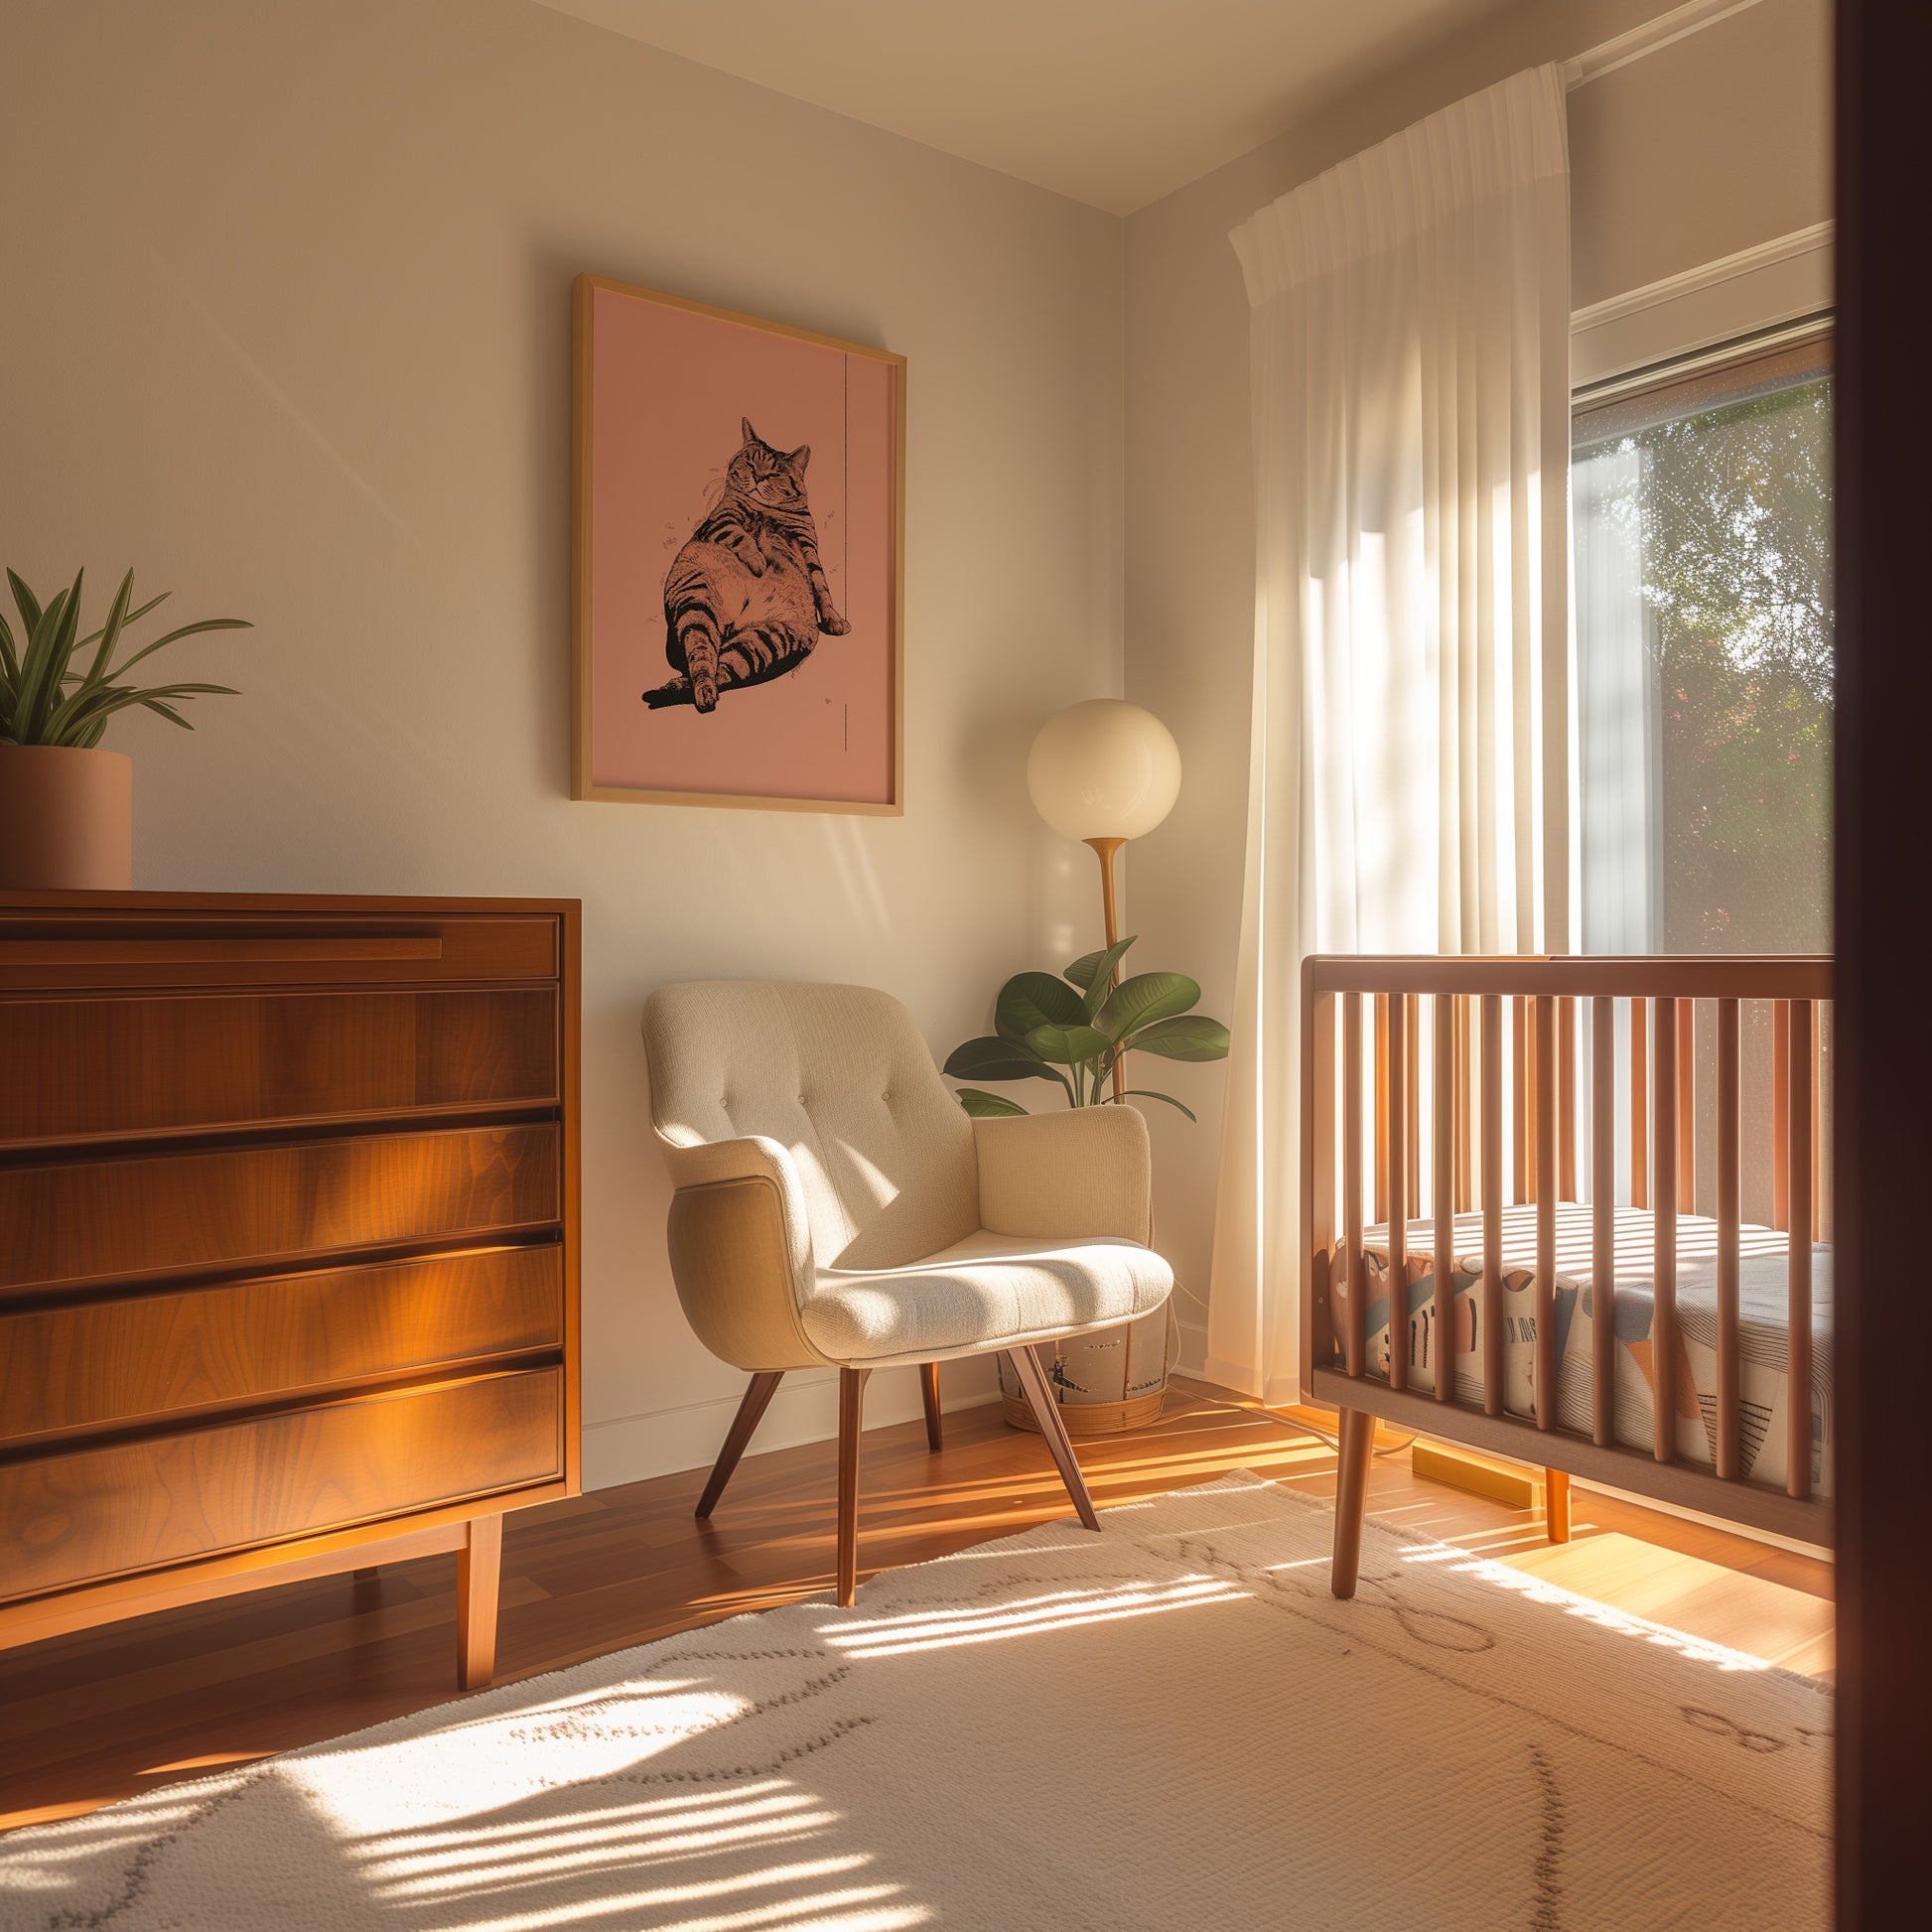 Cozy nursery room with a crib, armchair, and dresser during sunset.